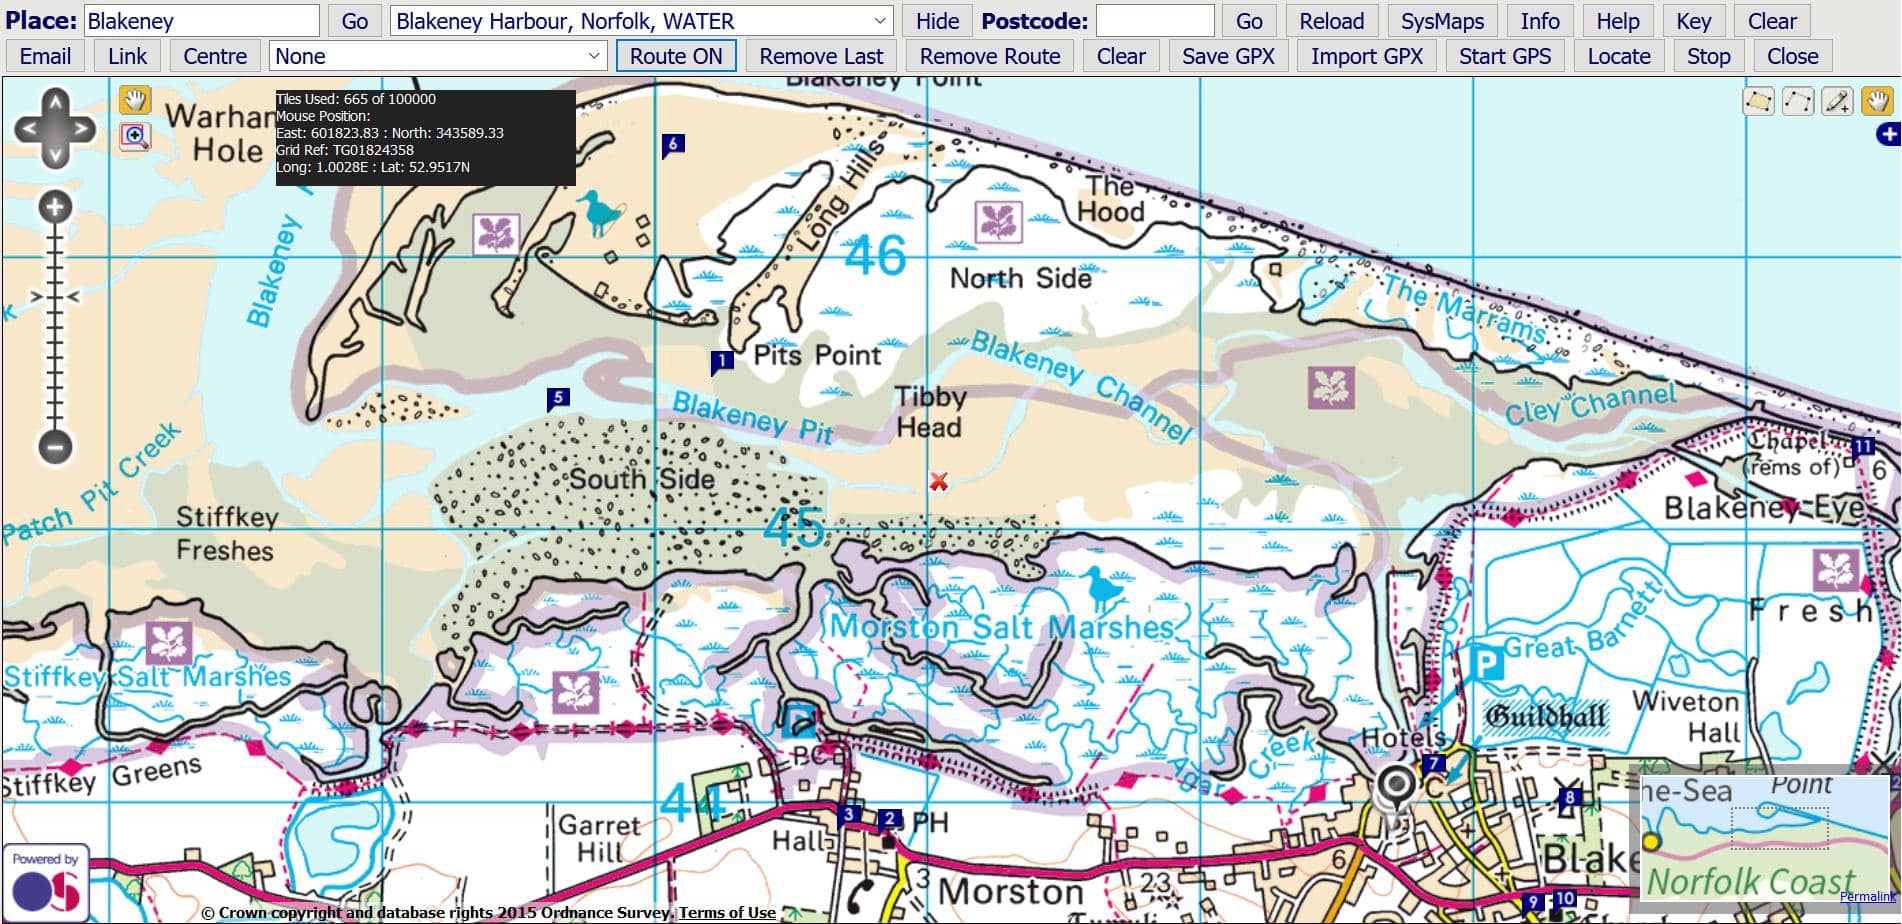 Gazetteer Search to View Map